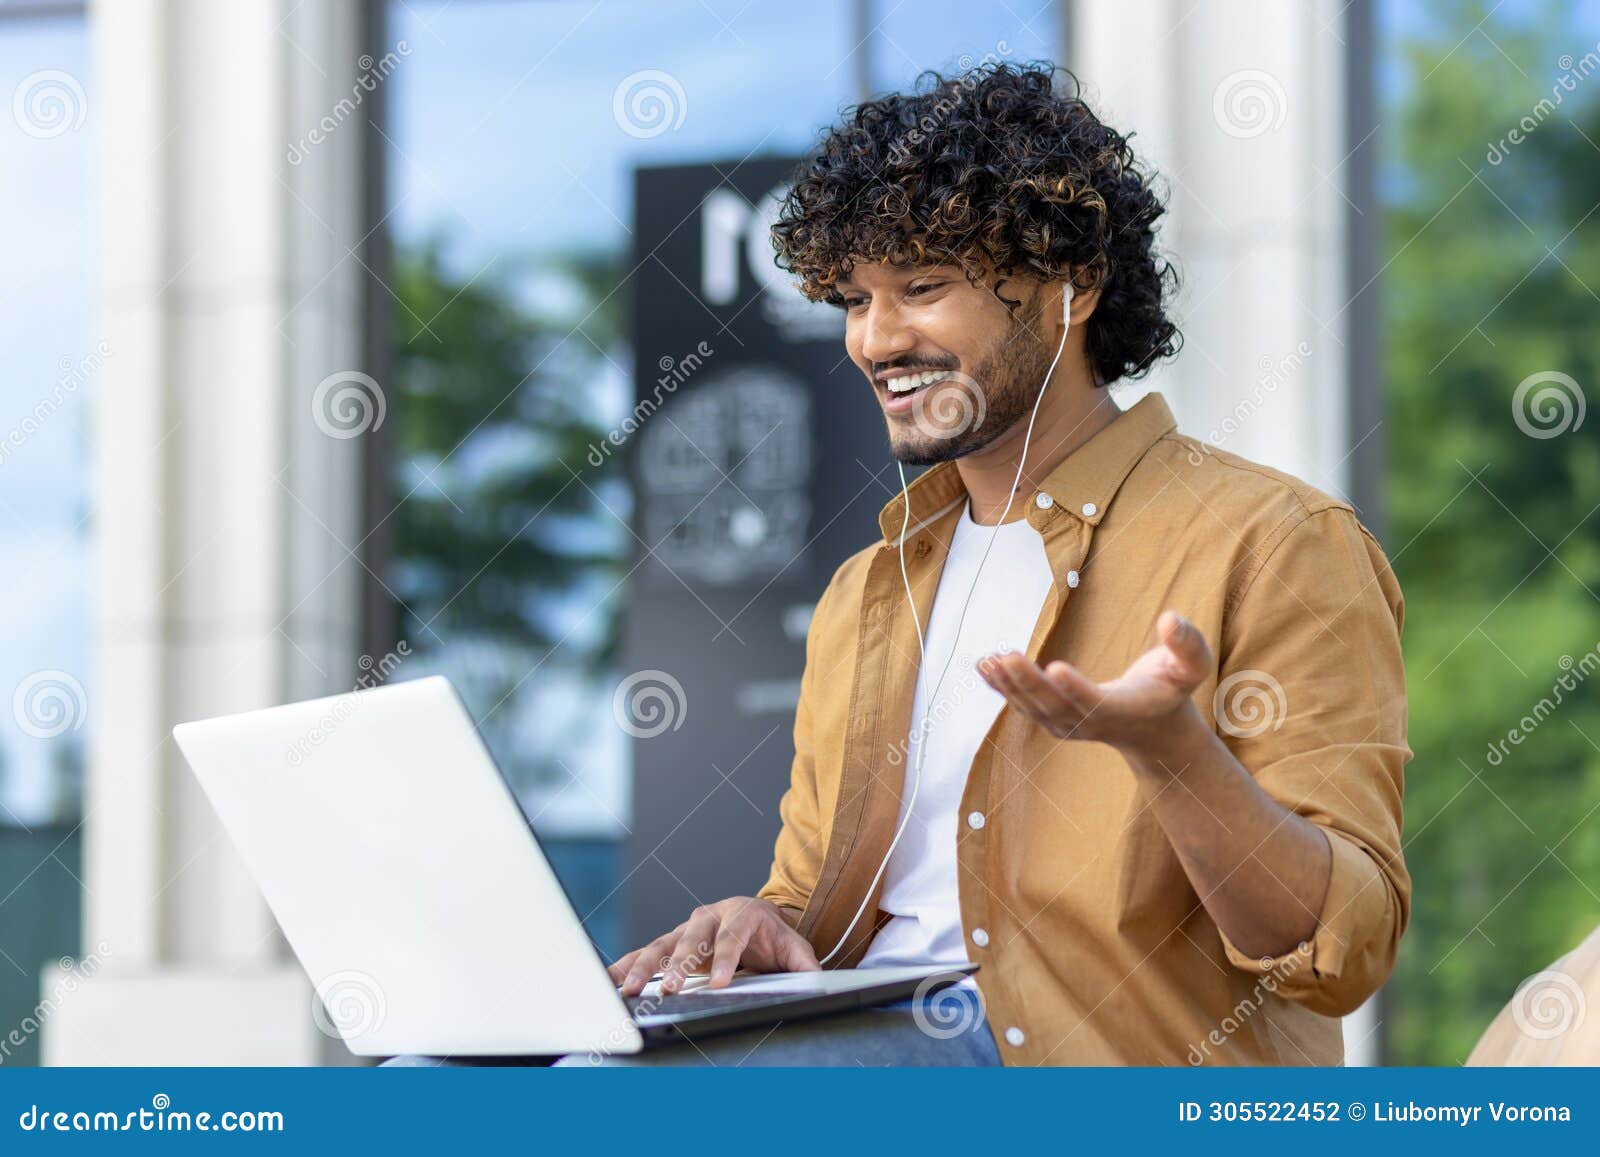 muslim young man sitting on a bench on a city street wearing headphones and smilingly talking on a video call on a